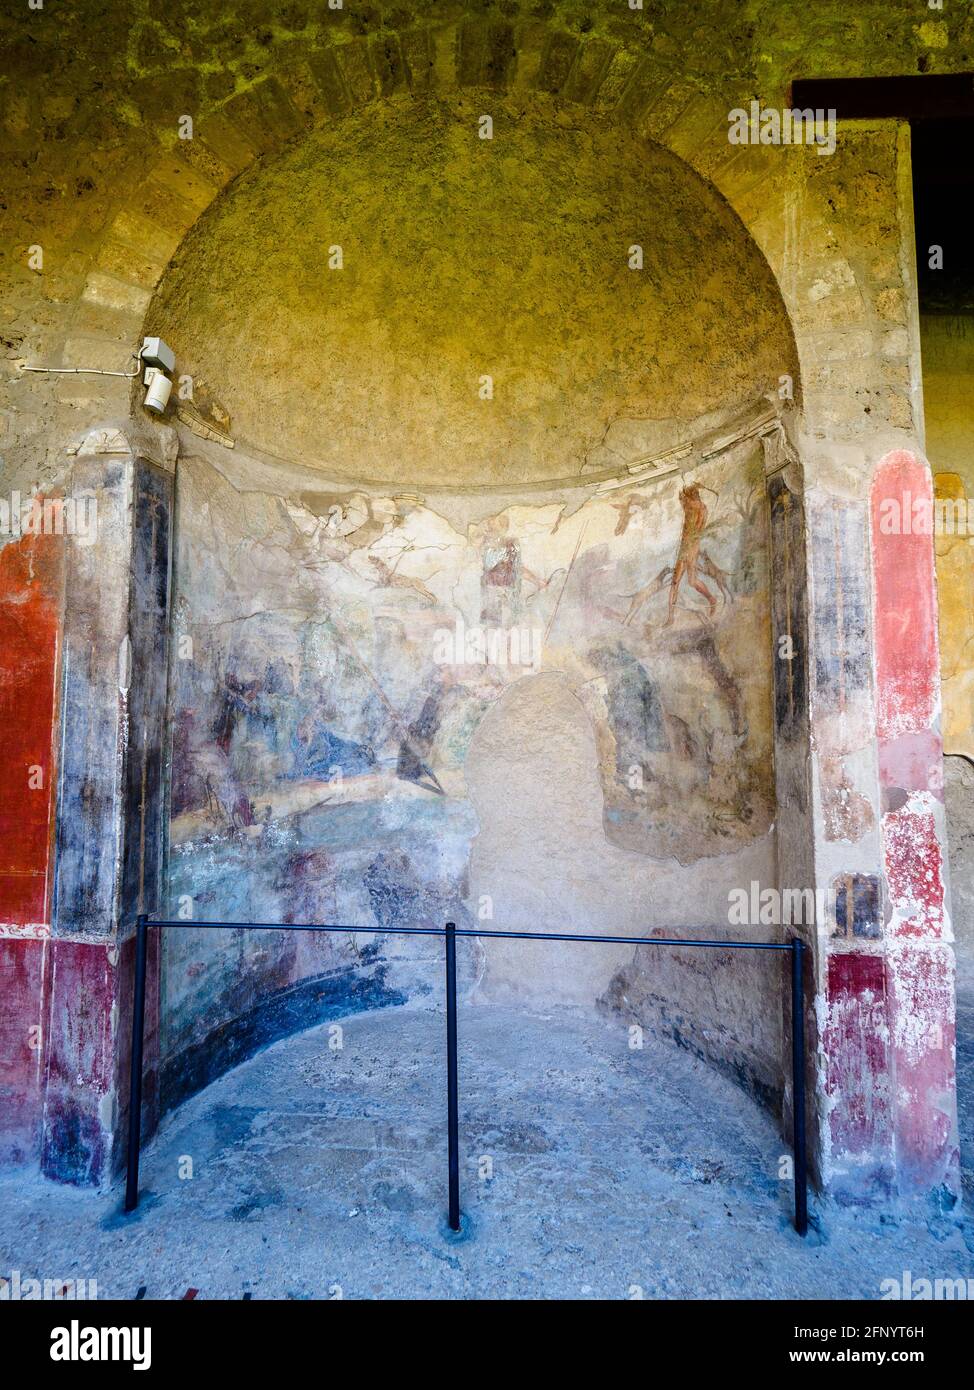 House of Menander (Casa del Menandro) - Pompeii archaeological site, Italy Stock Photo